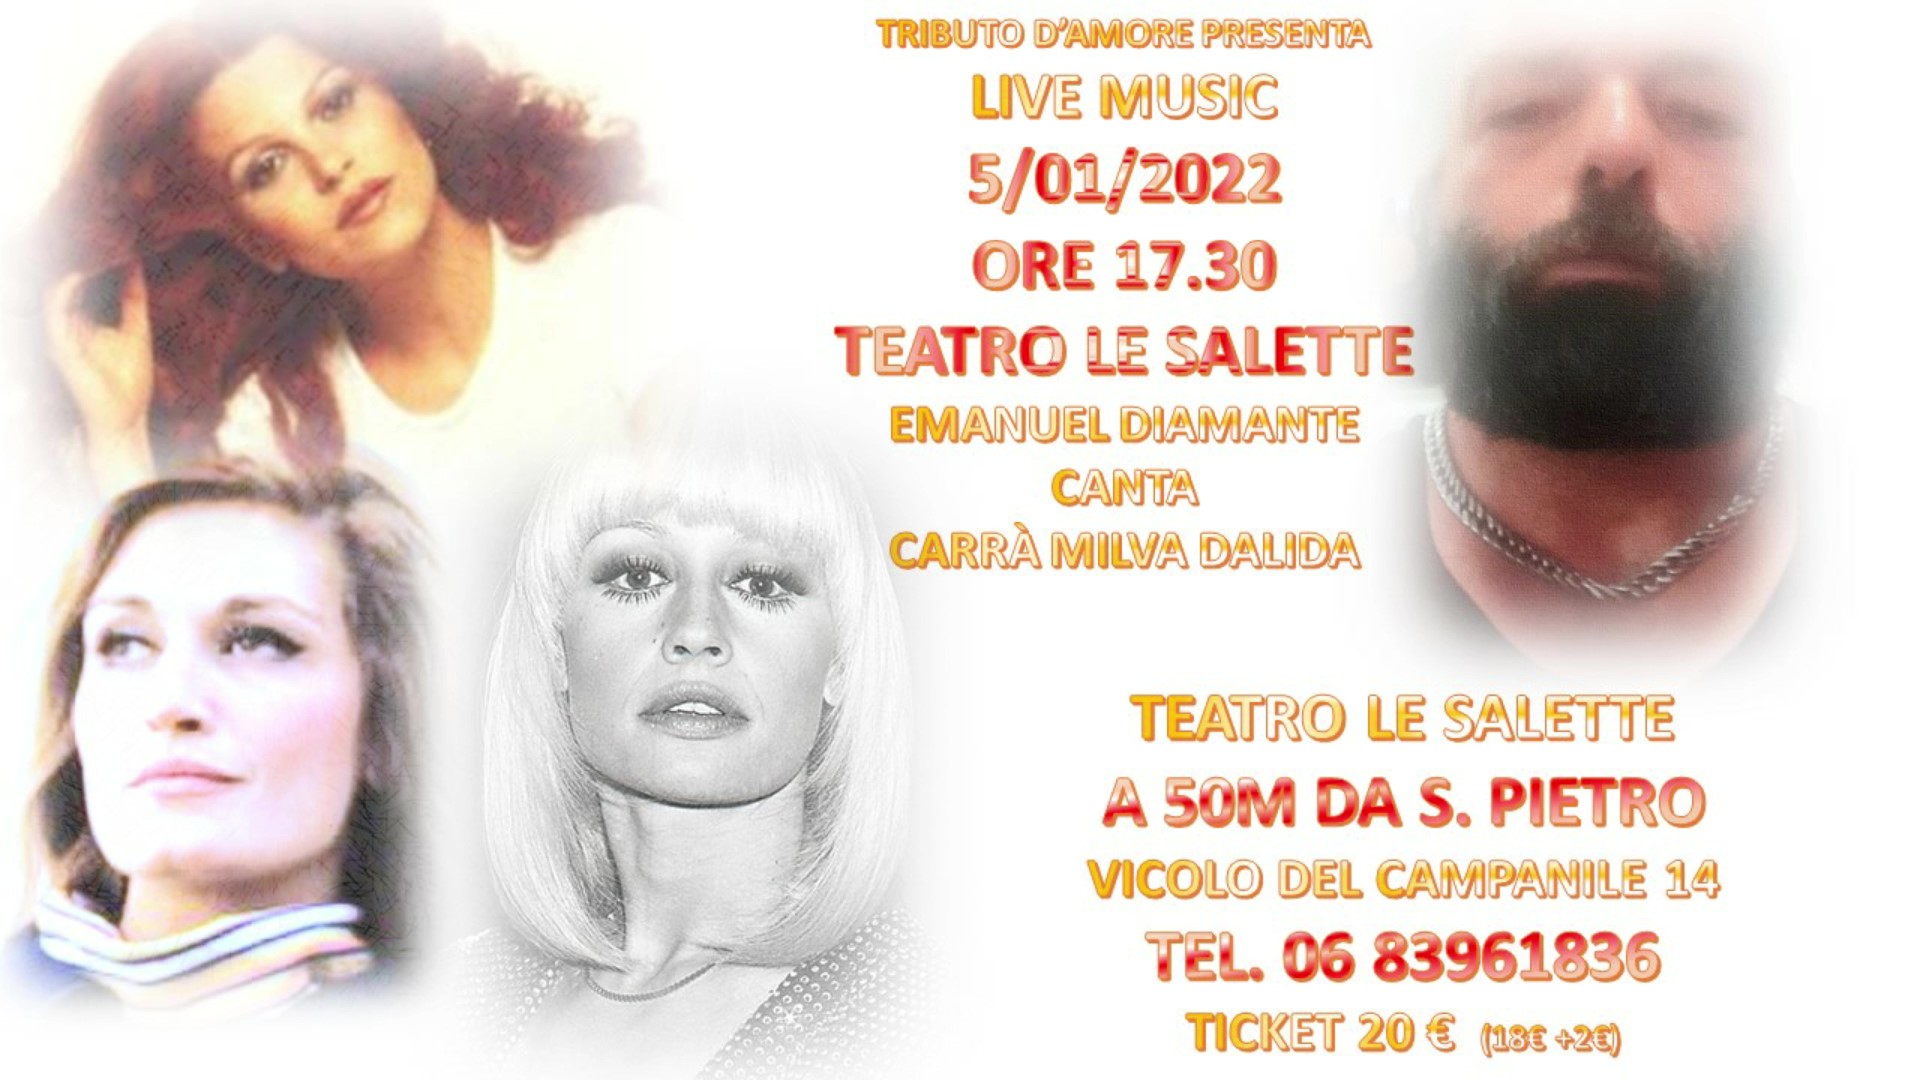 TRIBUTO D’AMORE